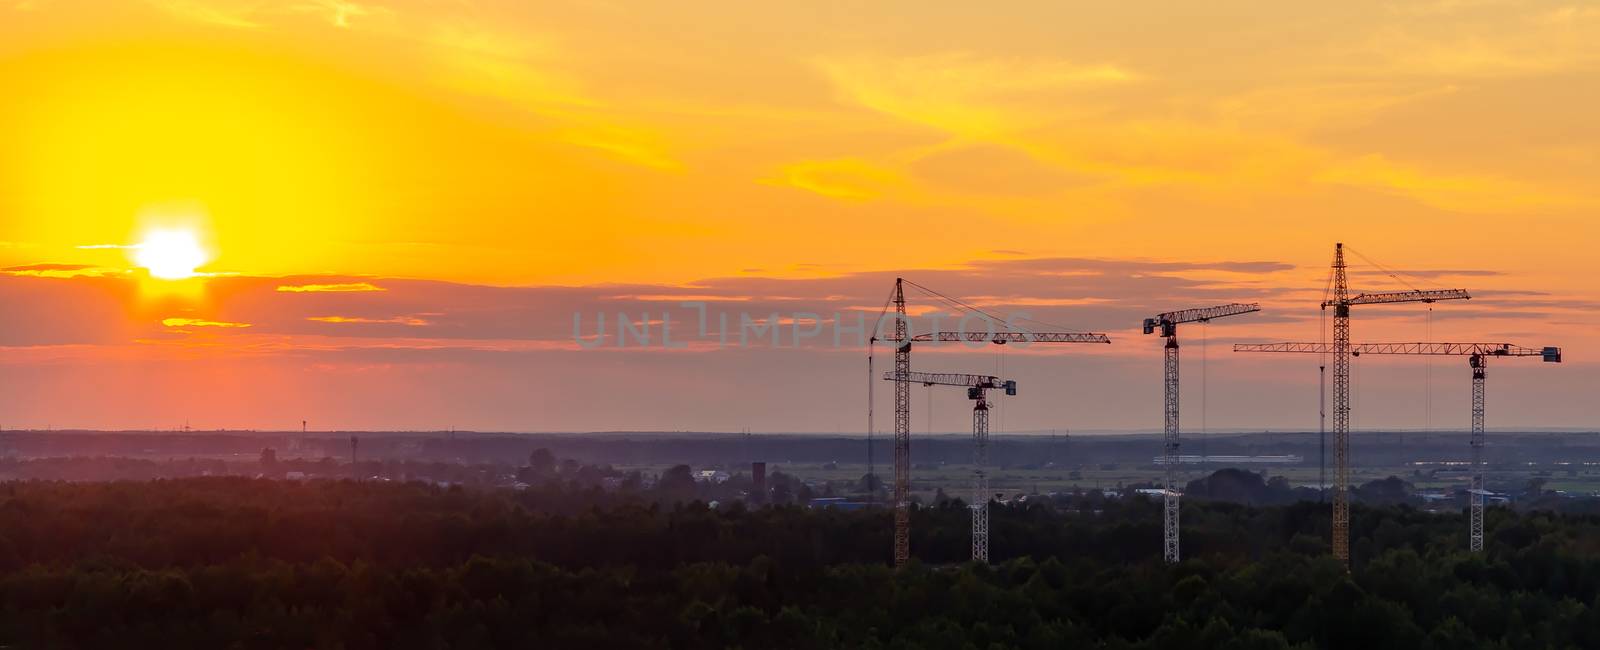 Several construction cranes on the background of colorful sunset sky.